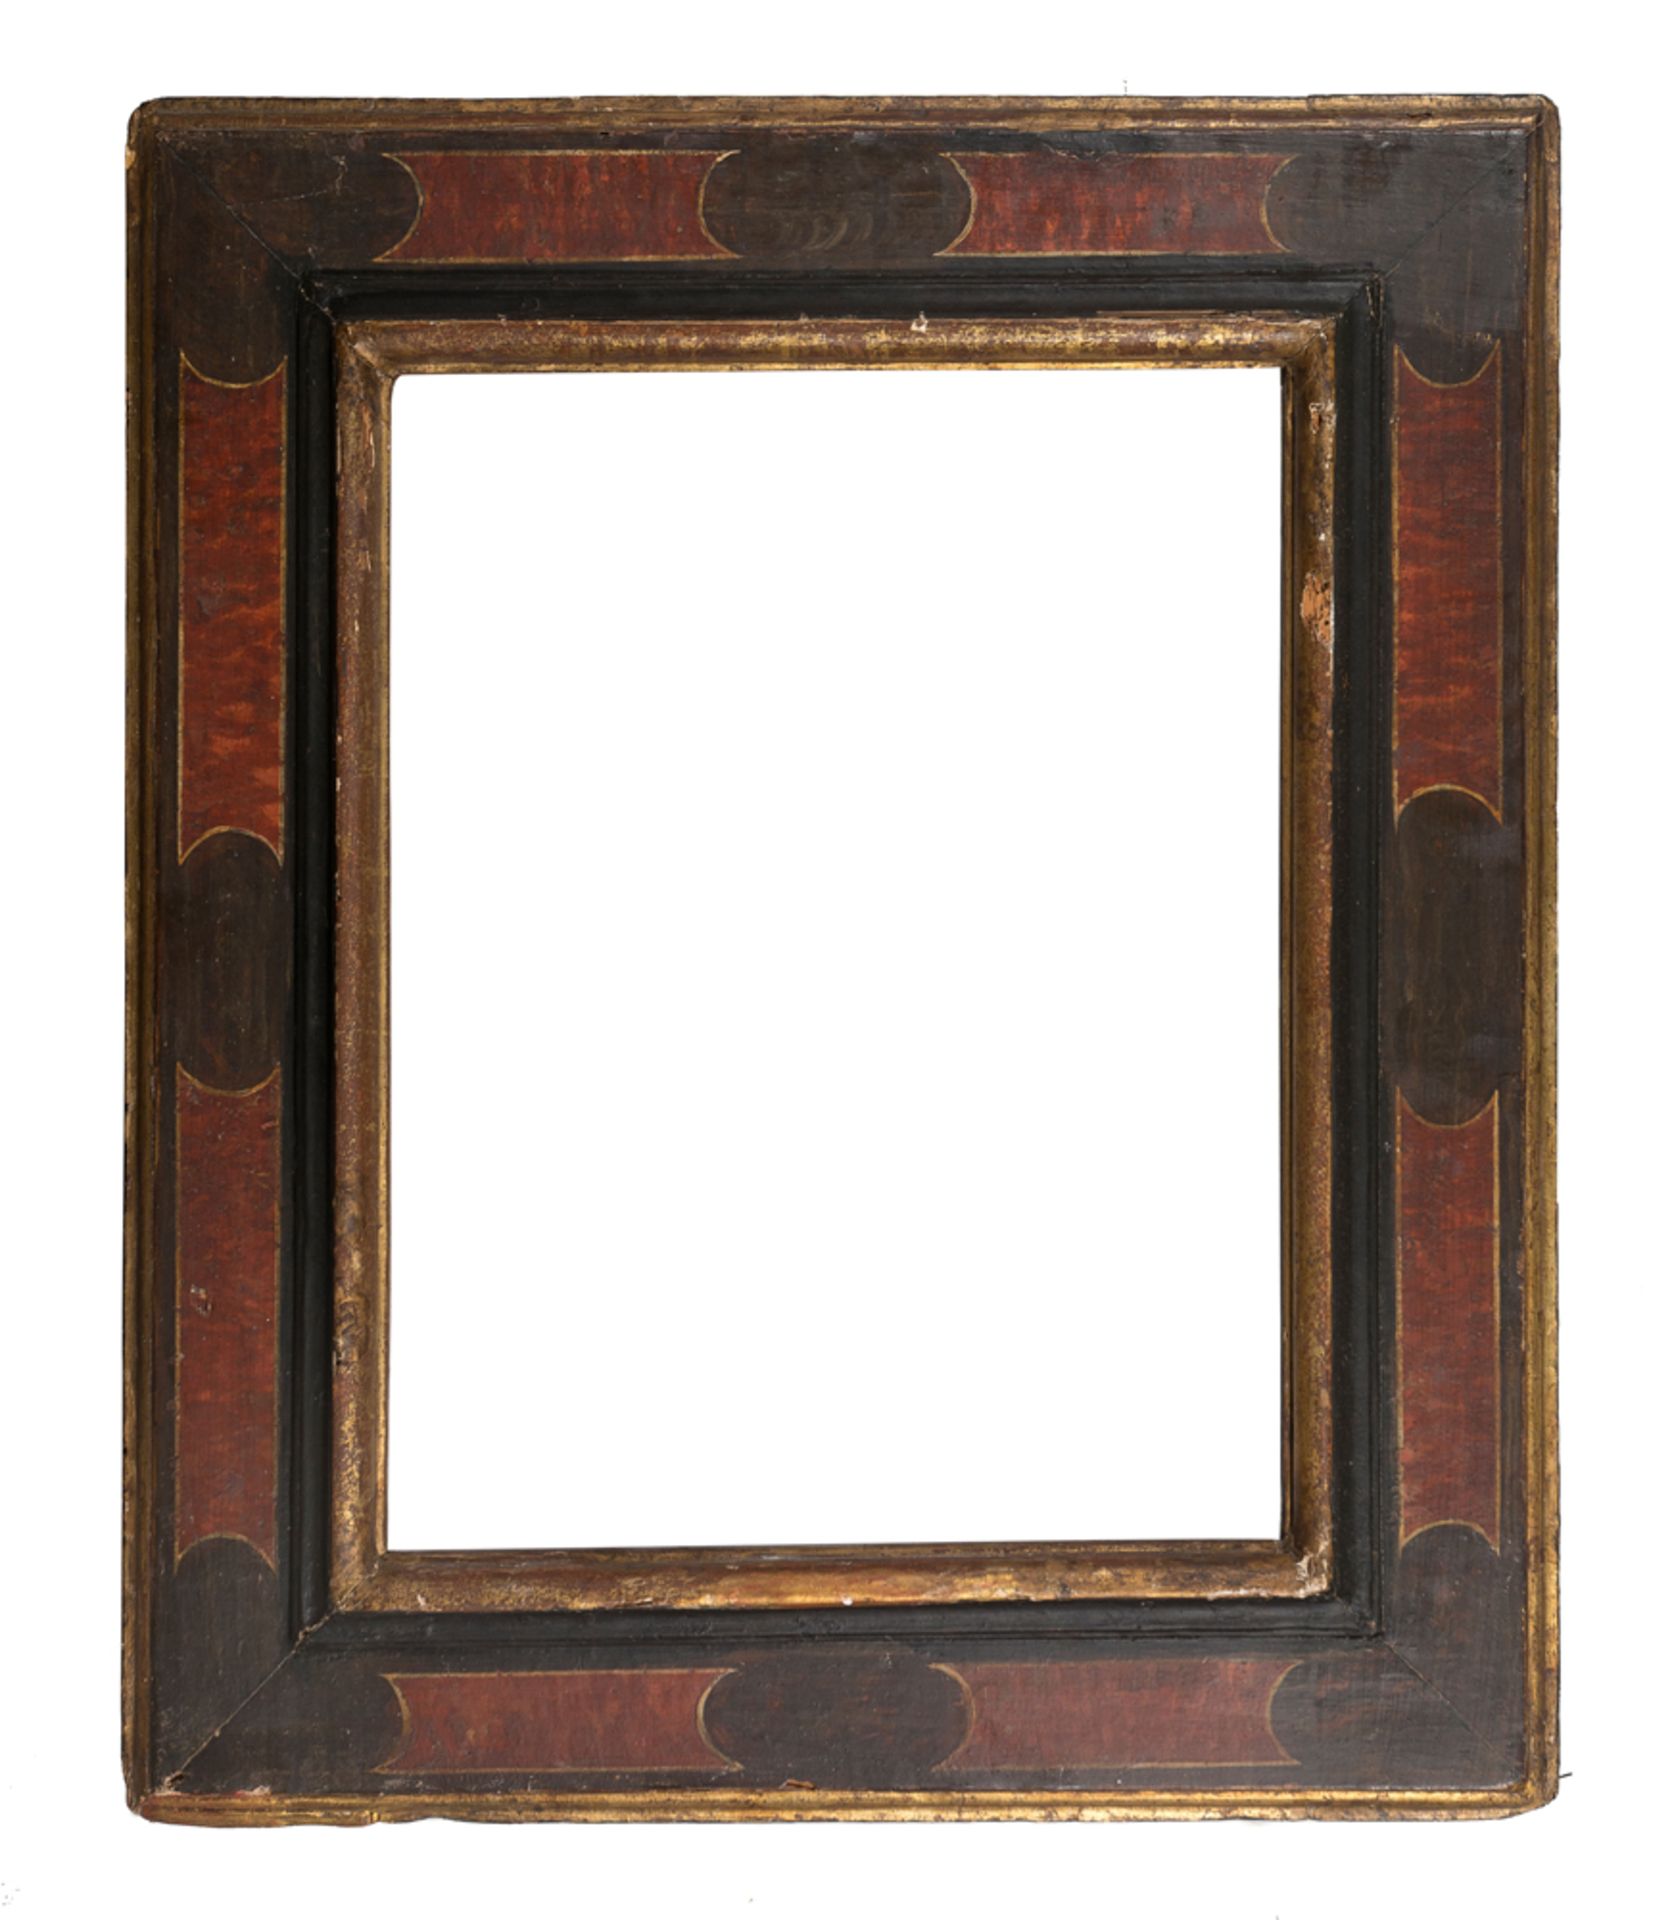 Carved, gilded and polychromed wooden frame. 17th century.